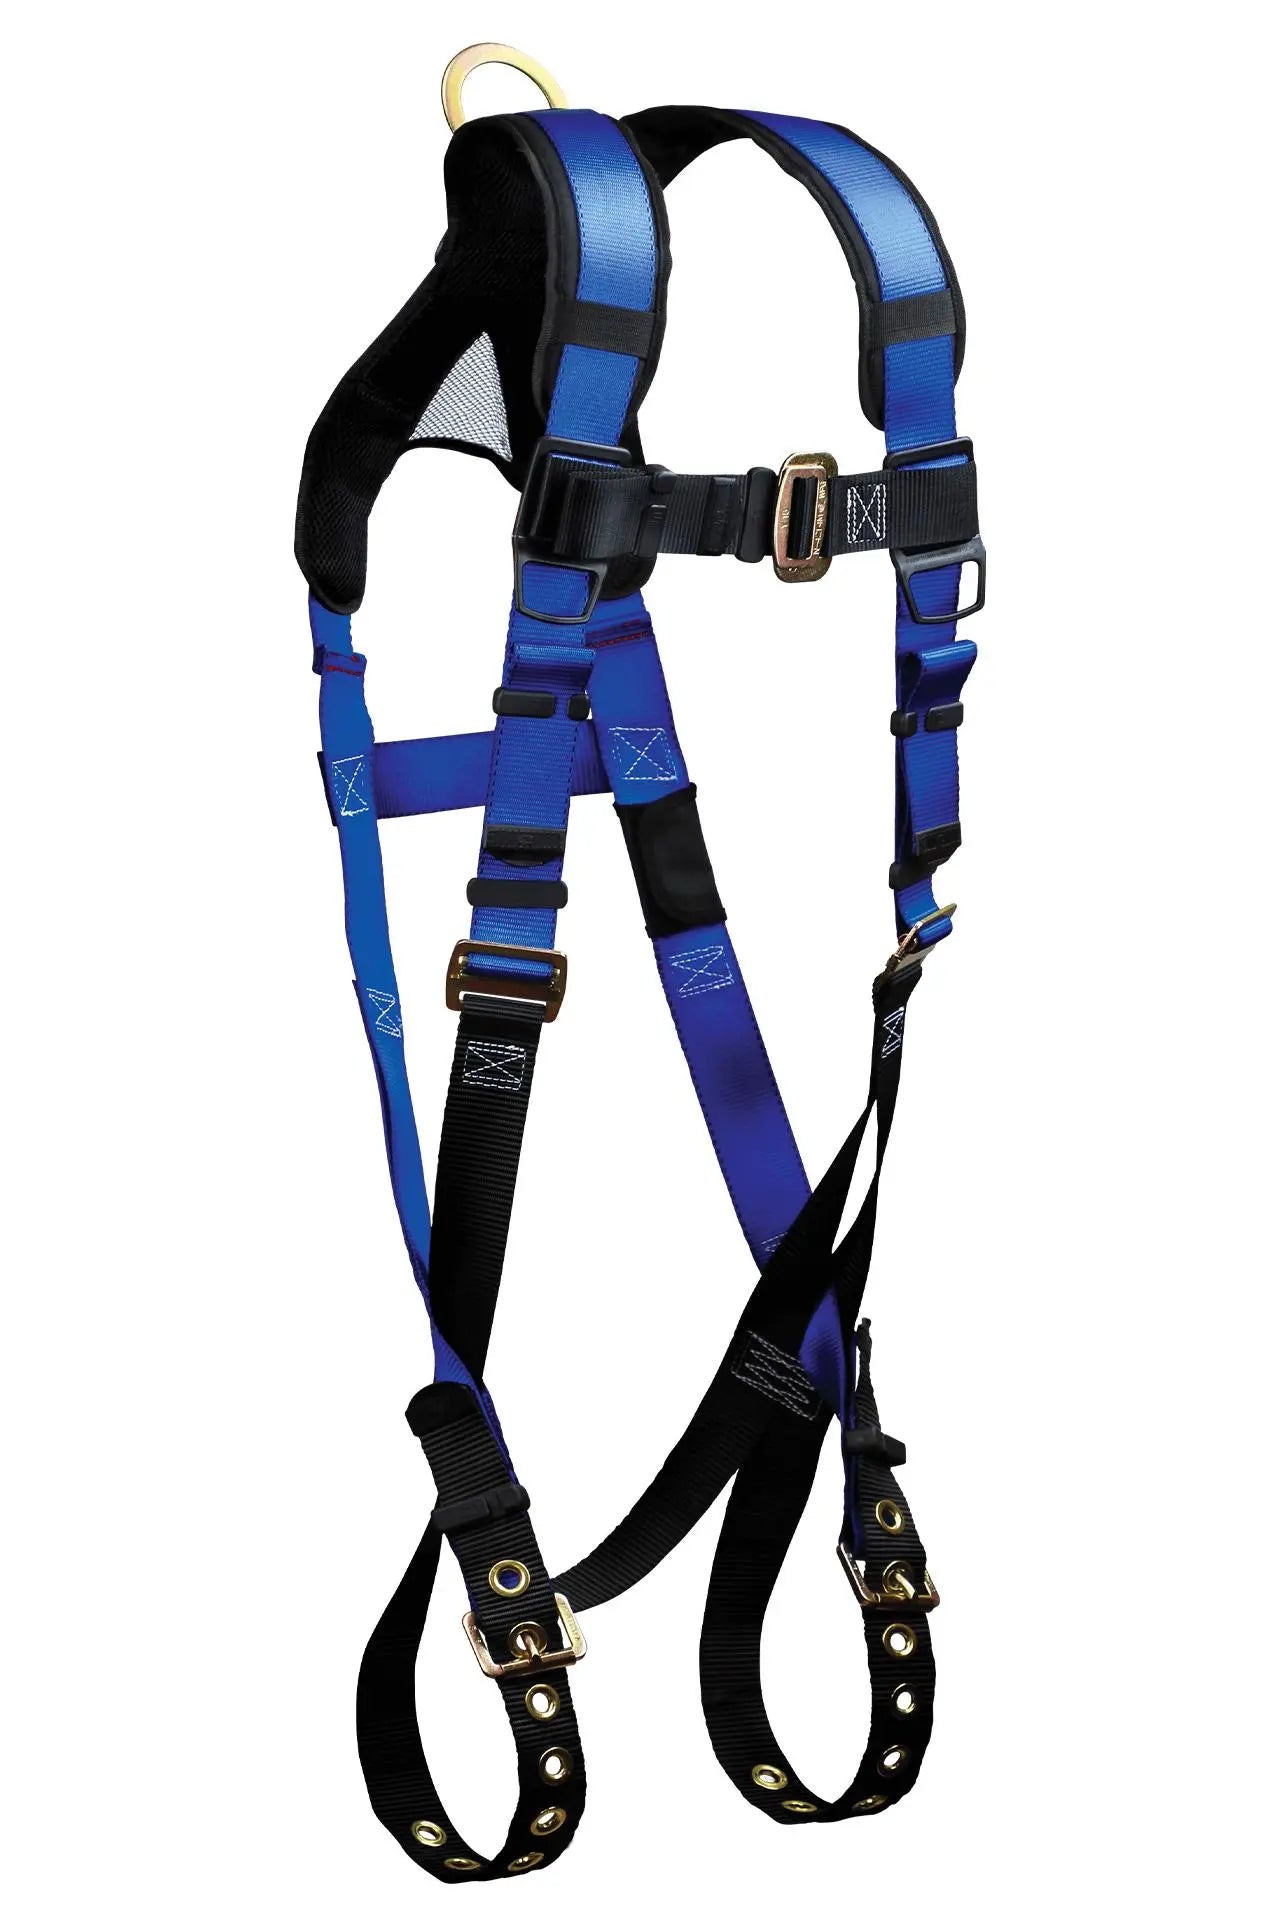 FALLTECH - Contractor+ 1D Standard Non-belted Full Body Harness